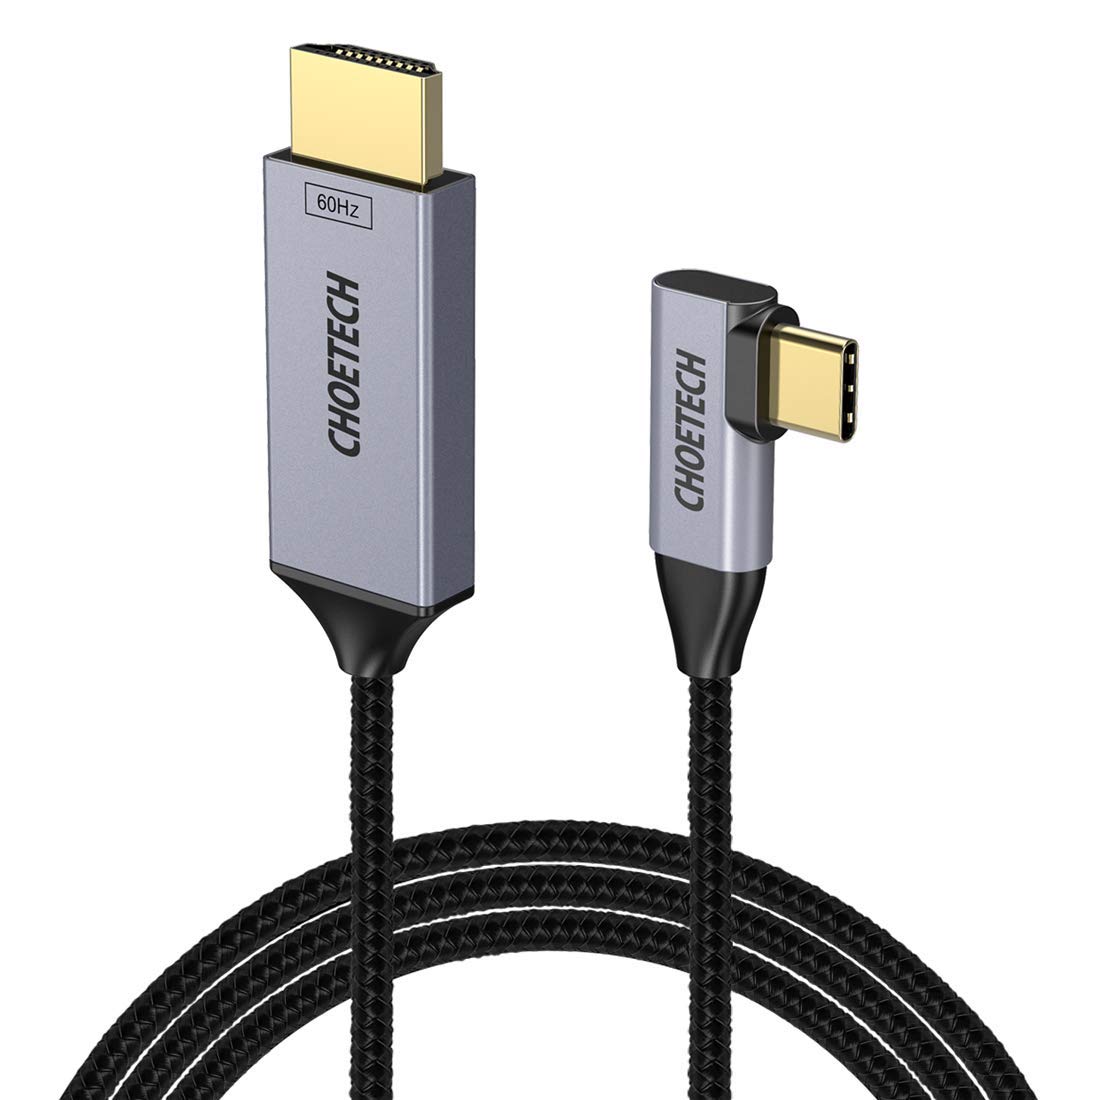 Usb c to hdmi for macbook pro 2018